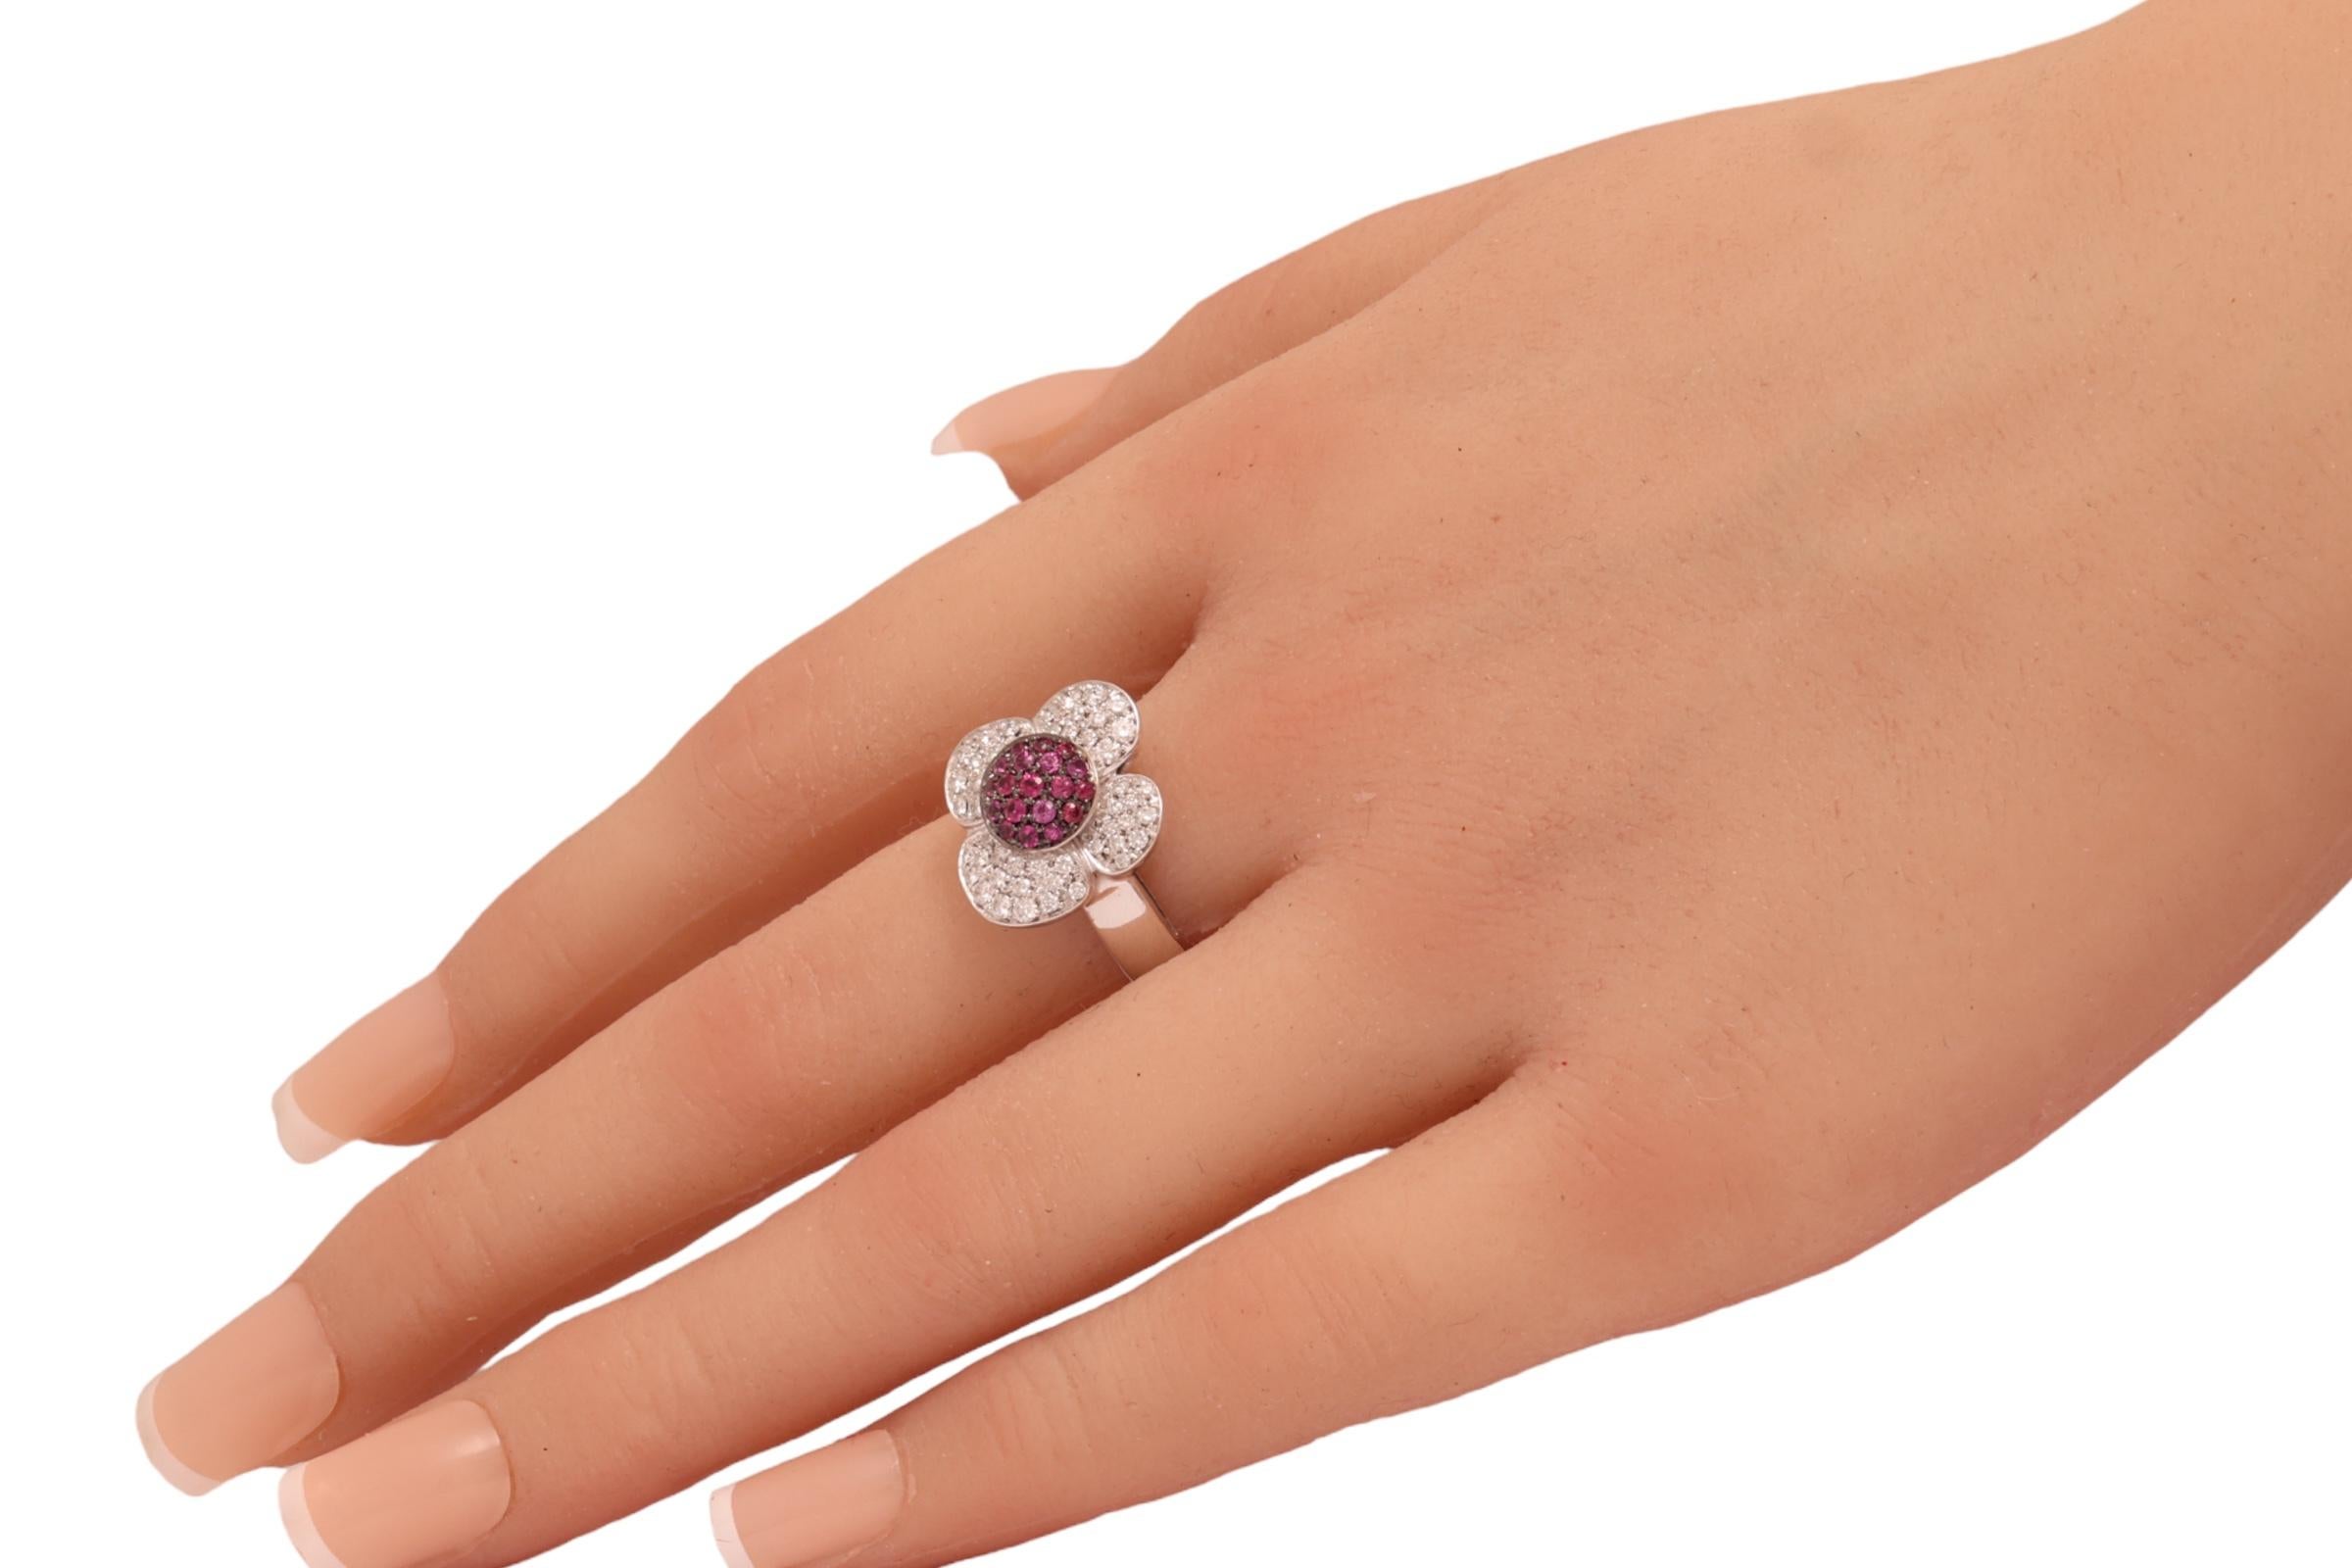  18 kt. White Gold Flower Shape Ring with 1 ct. Diamonds & 0.5 ct. Pink Sapphire For Sale 2